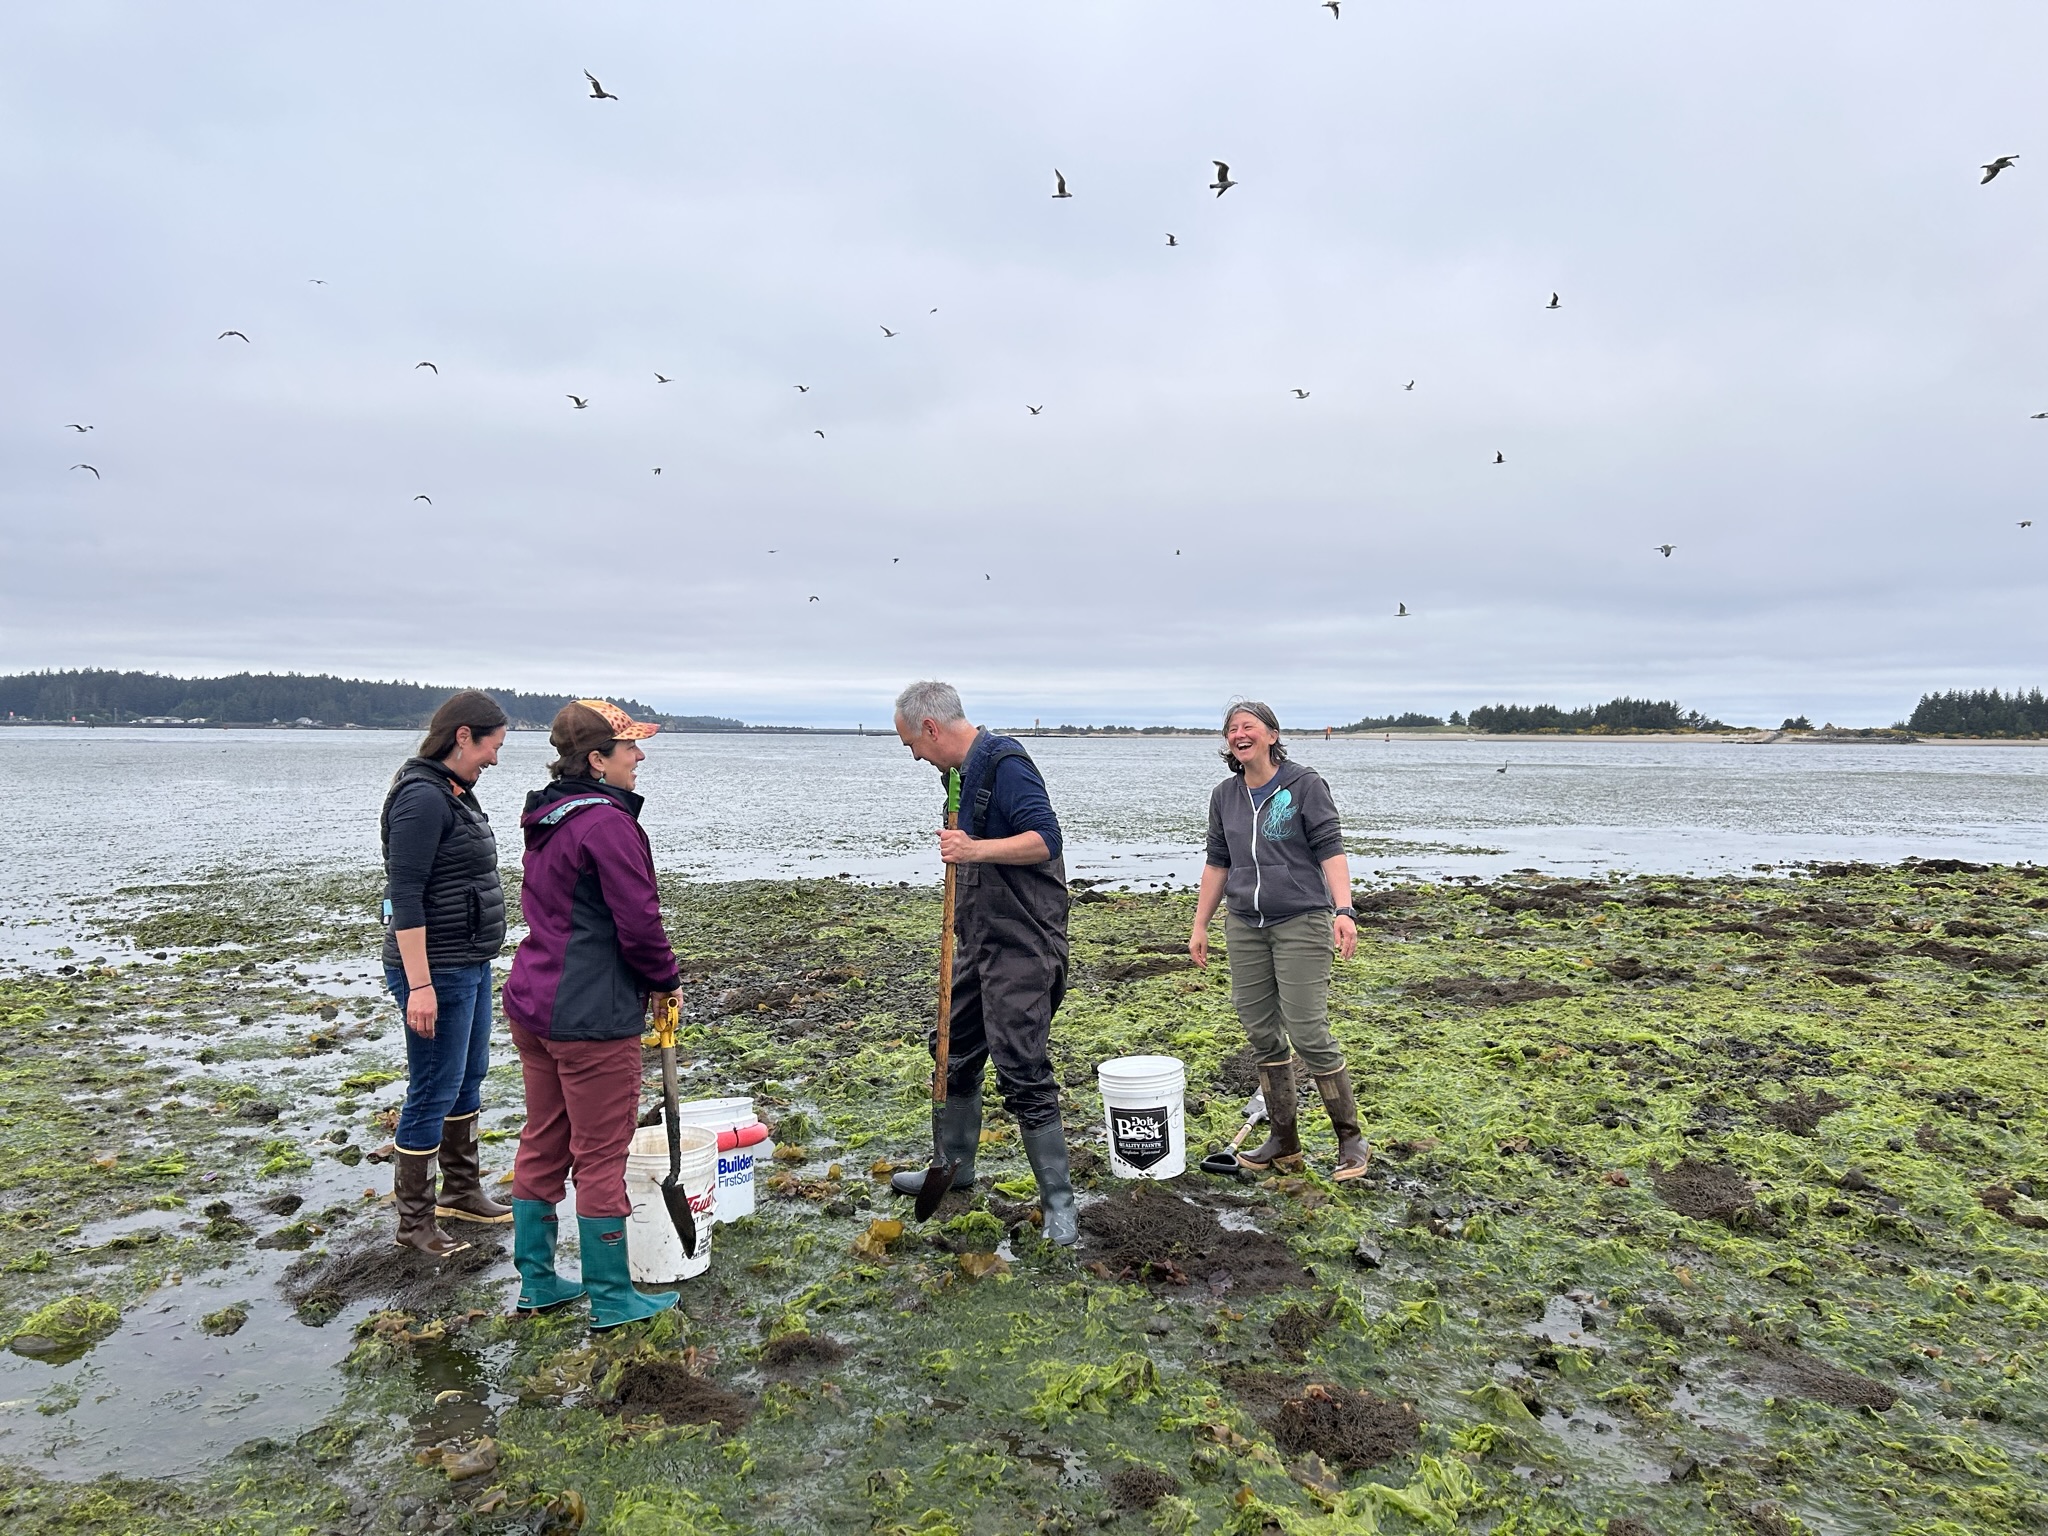 Partners from Pacific Birds, South Slough NERR, and Confederated Tribes of Coos, Lower Umpqua and Siuslaw Indians (CTCLUSI) harvesting shellfish at Coos Bay, Oregon. Photo by: Jaime Belanger